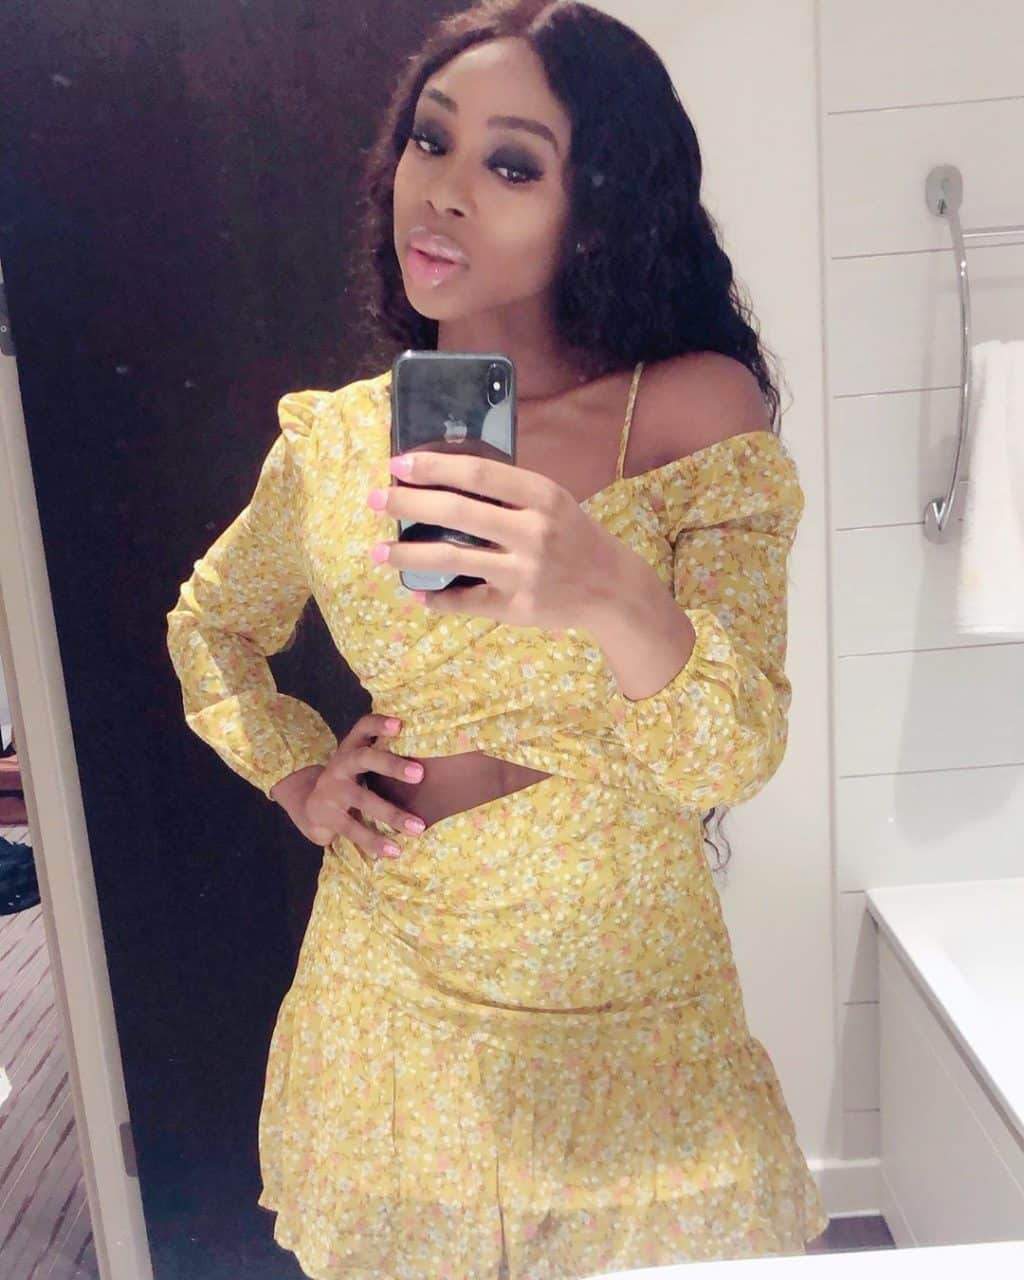 'She looks like Olamide' - Fans tell Maria Okan as she shares first full photos of her daughter